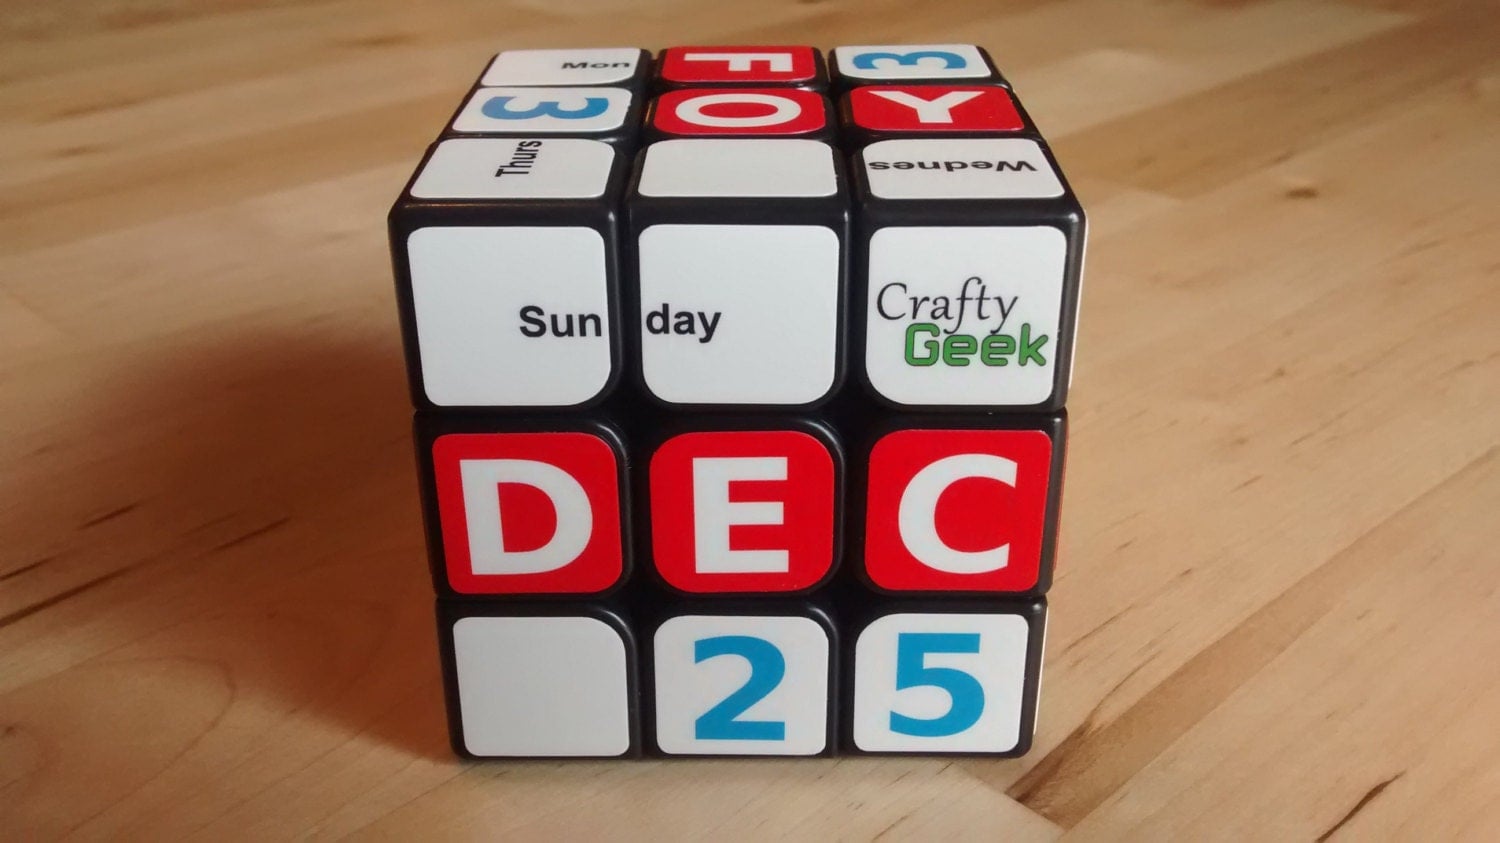 calendar-stickers-for-rubik-s-cube-by-craftygeekcreations-on-etsy